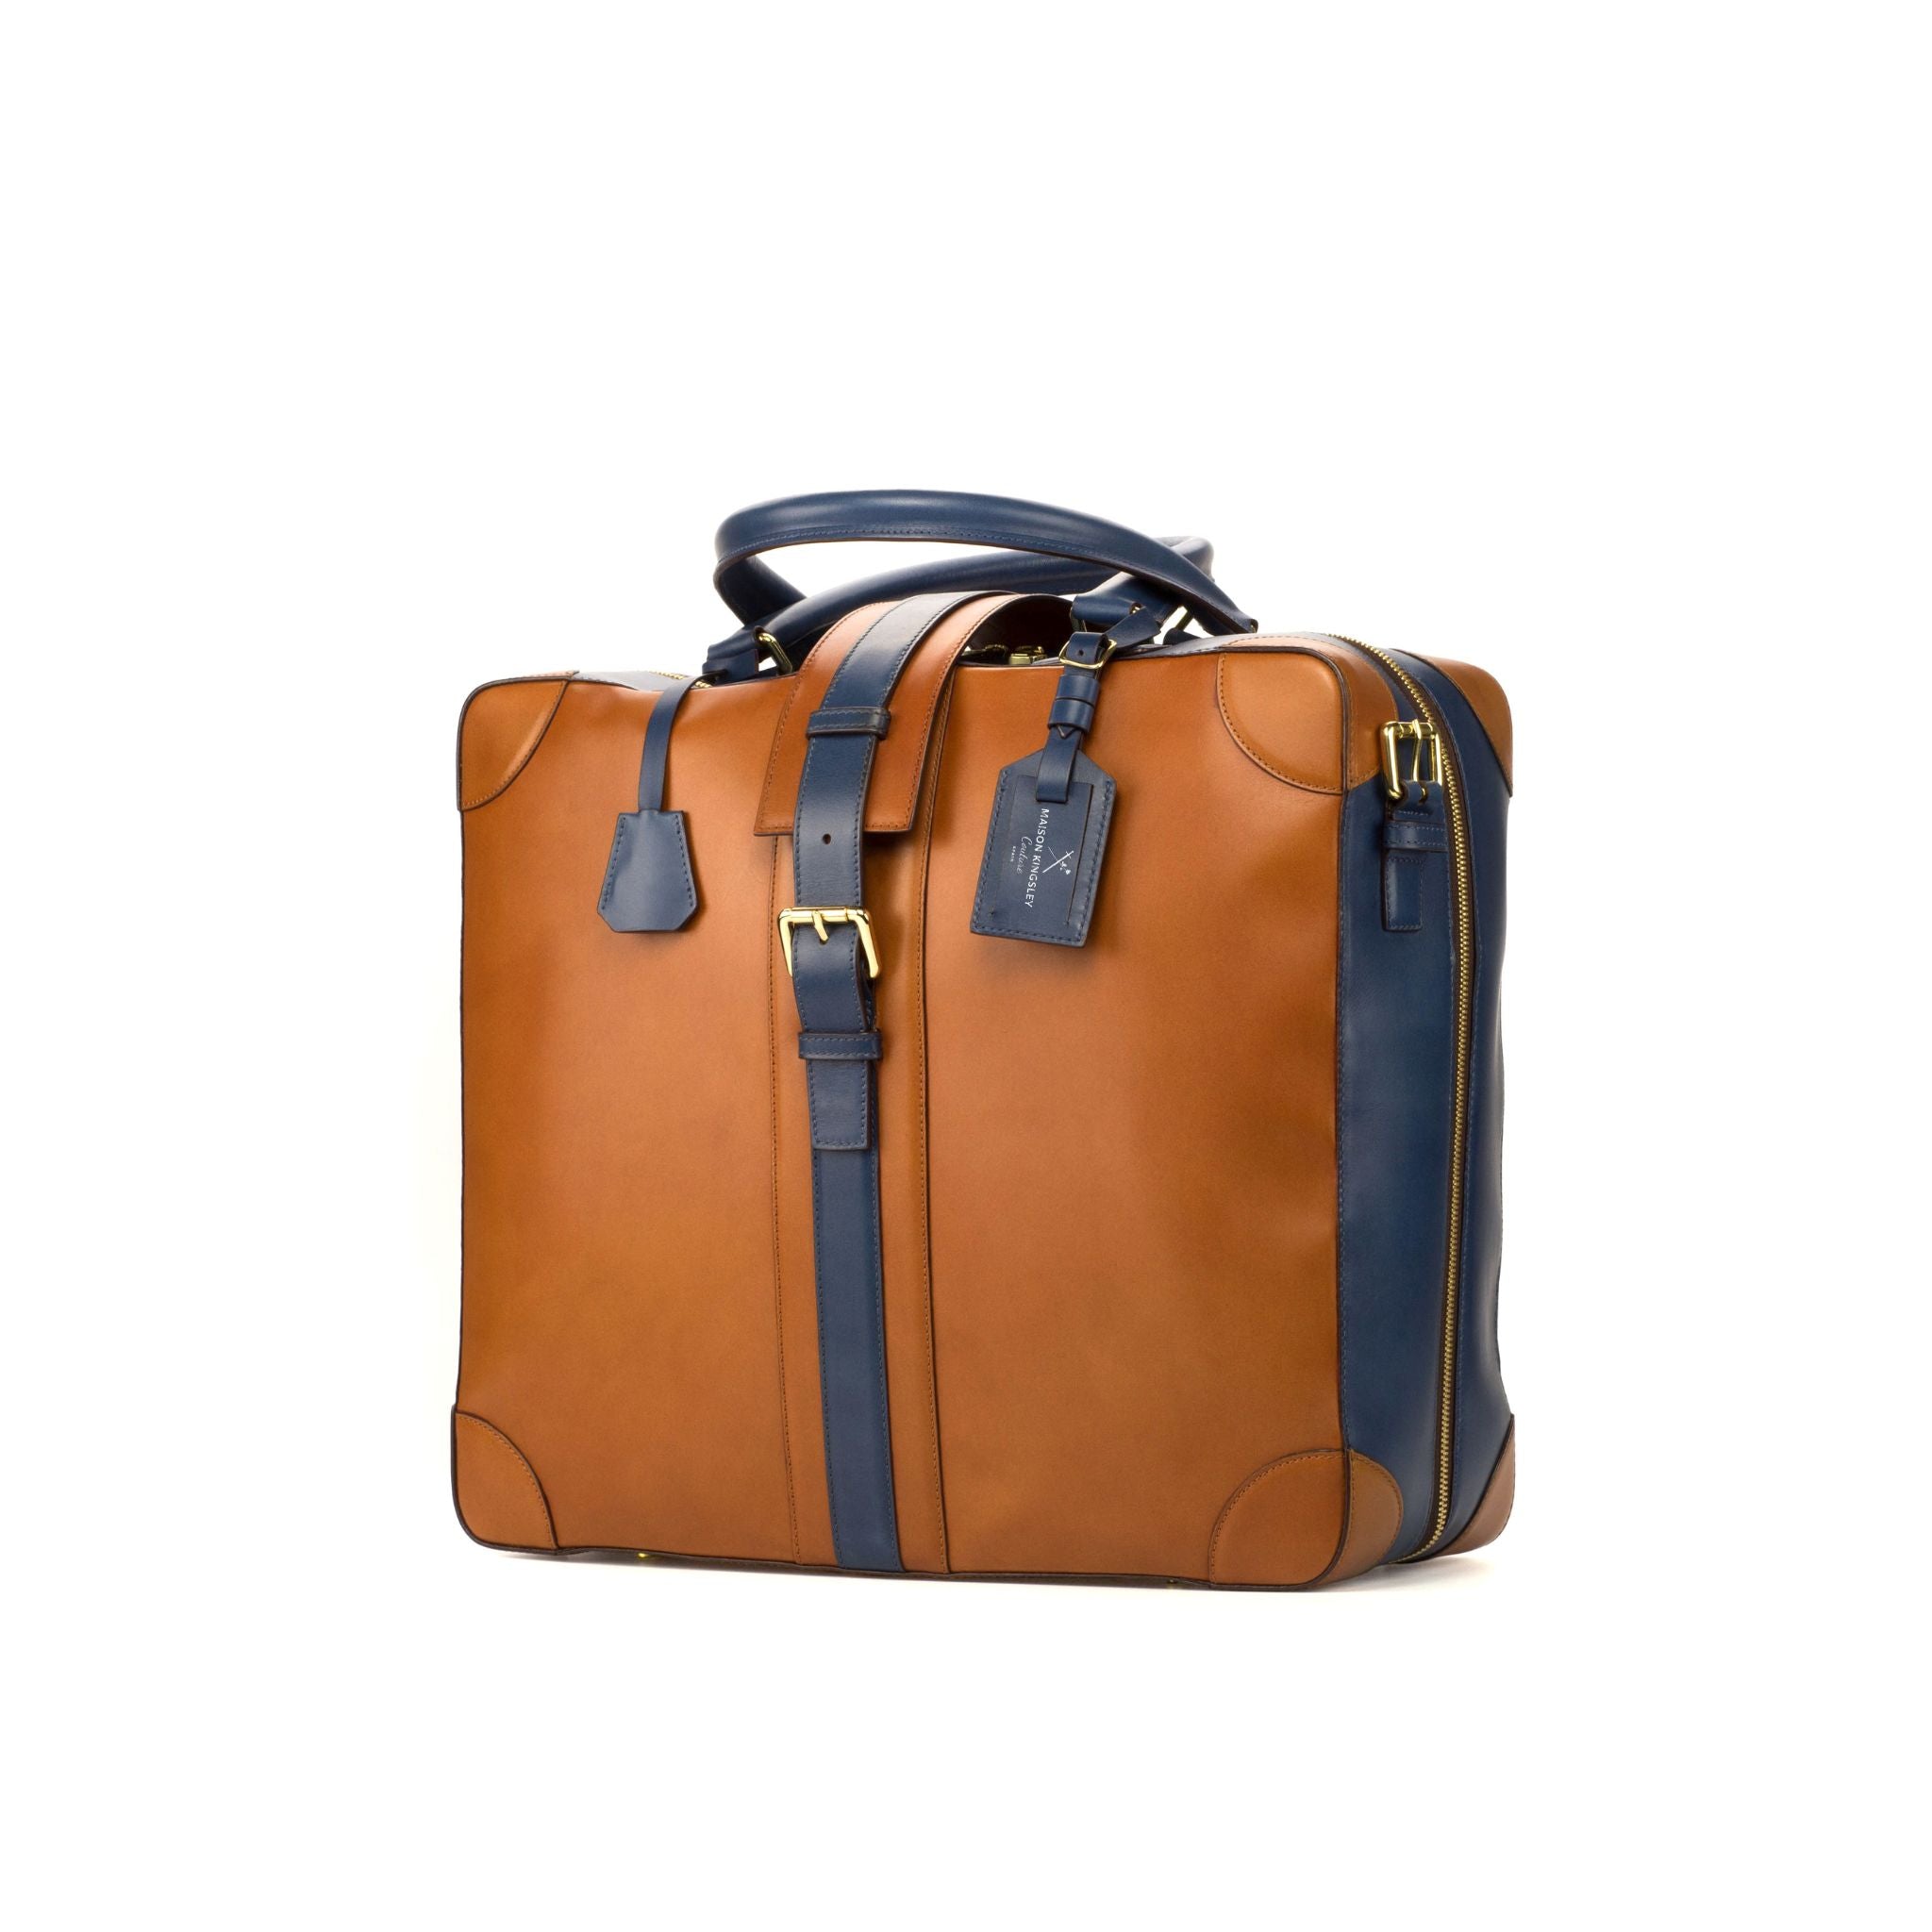 Zaragoza Travel Tote in Cognac Brown and Navy Calf Leather